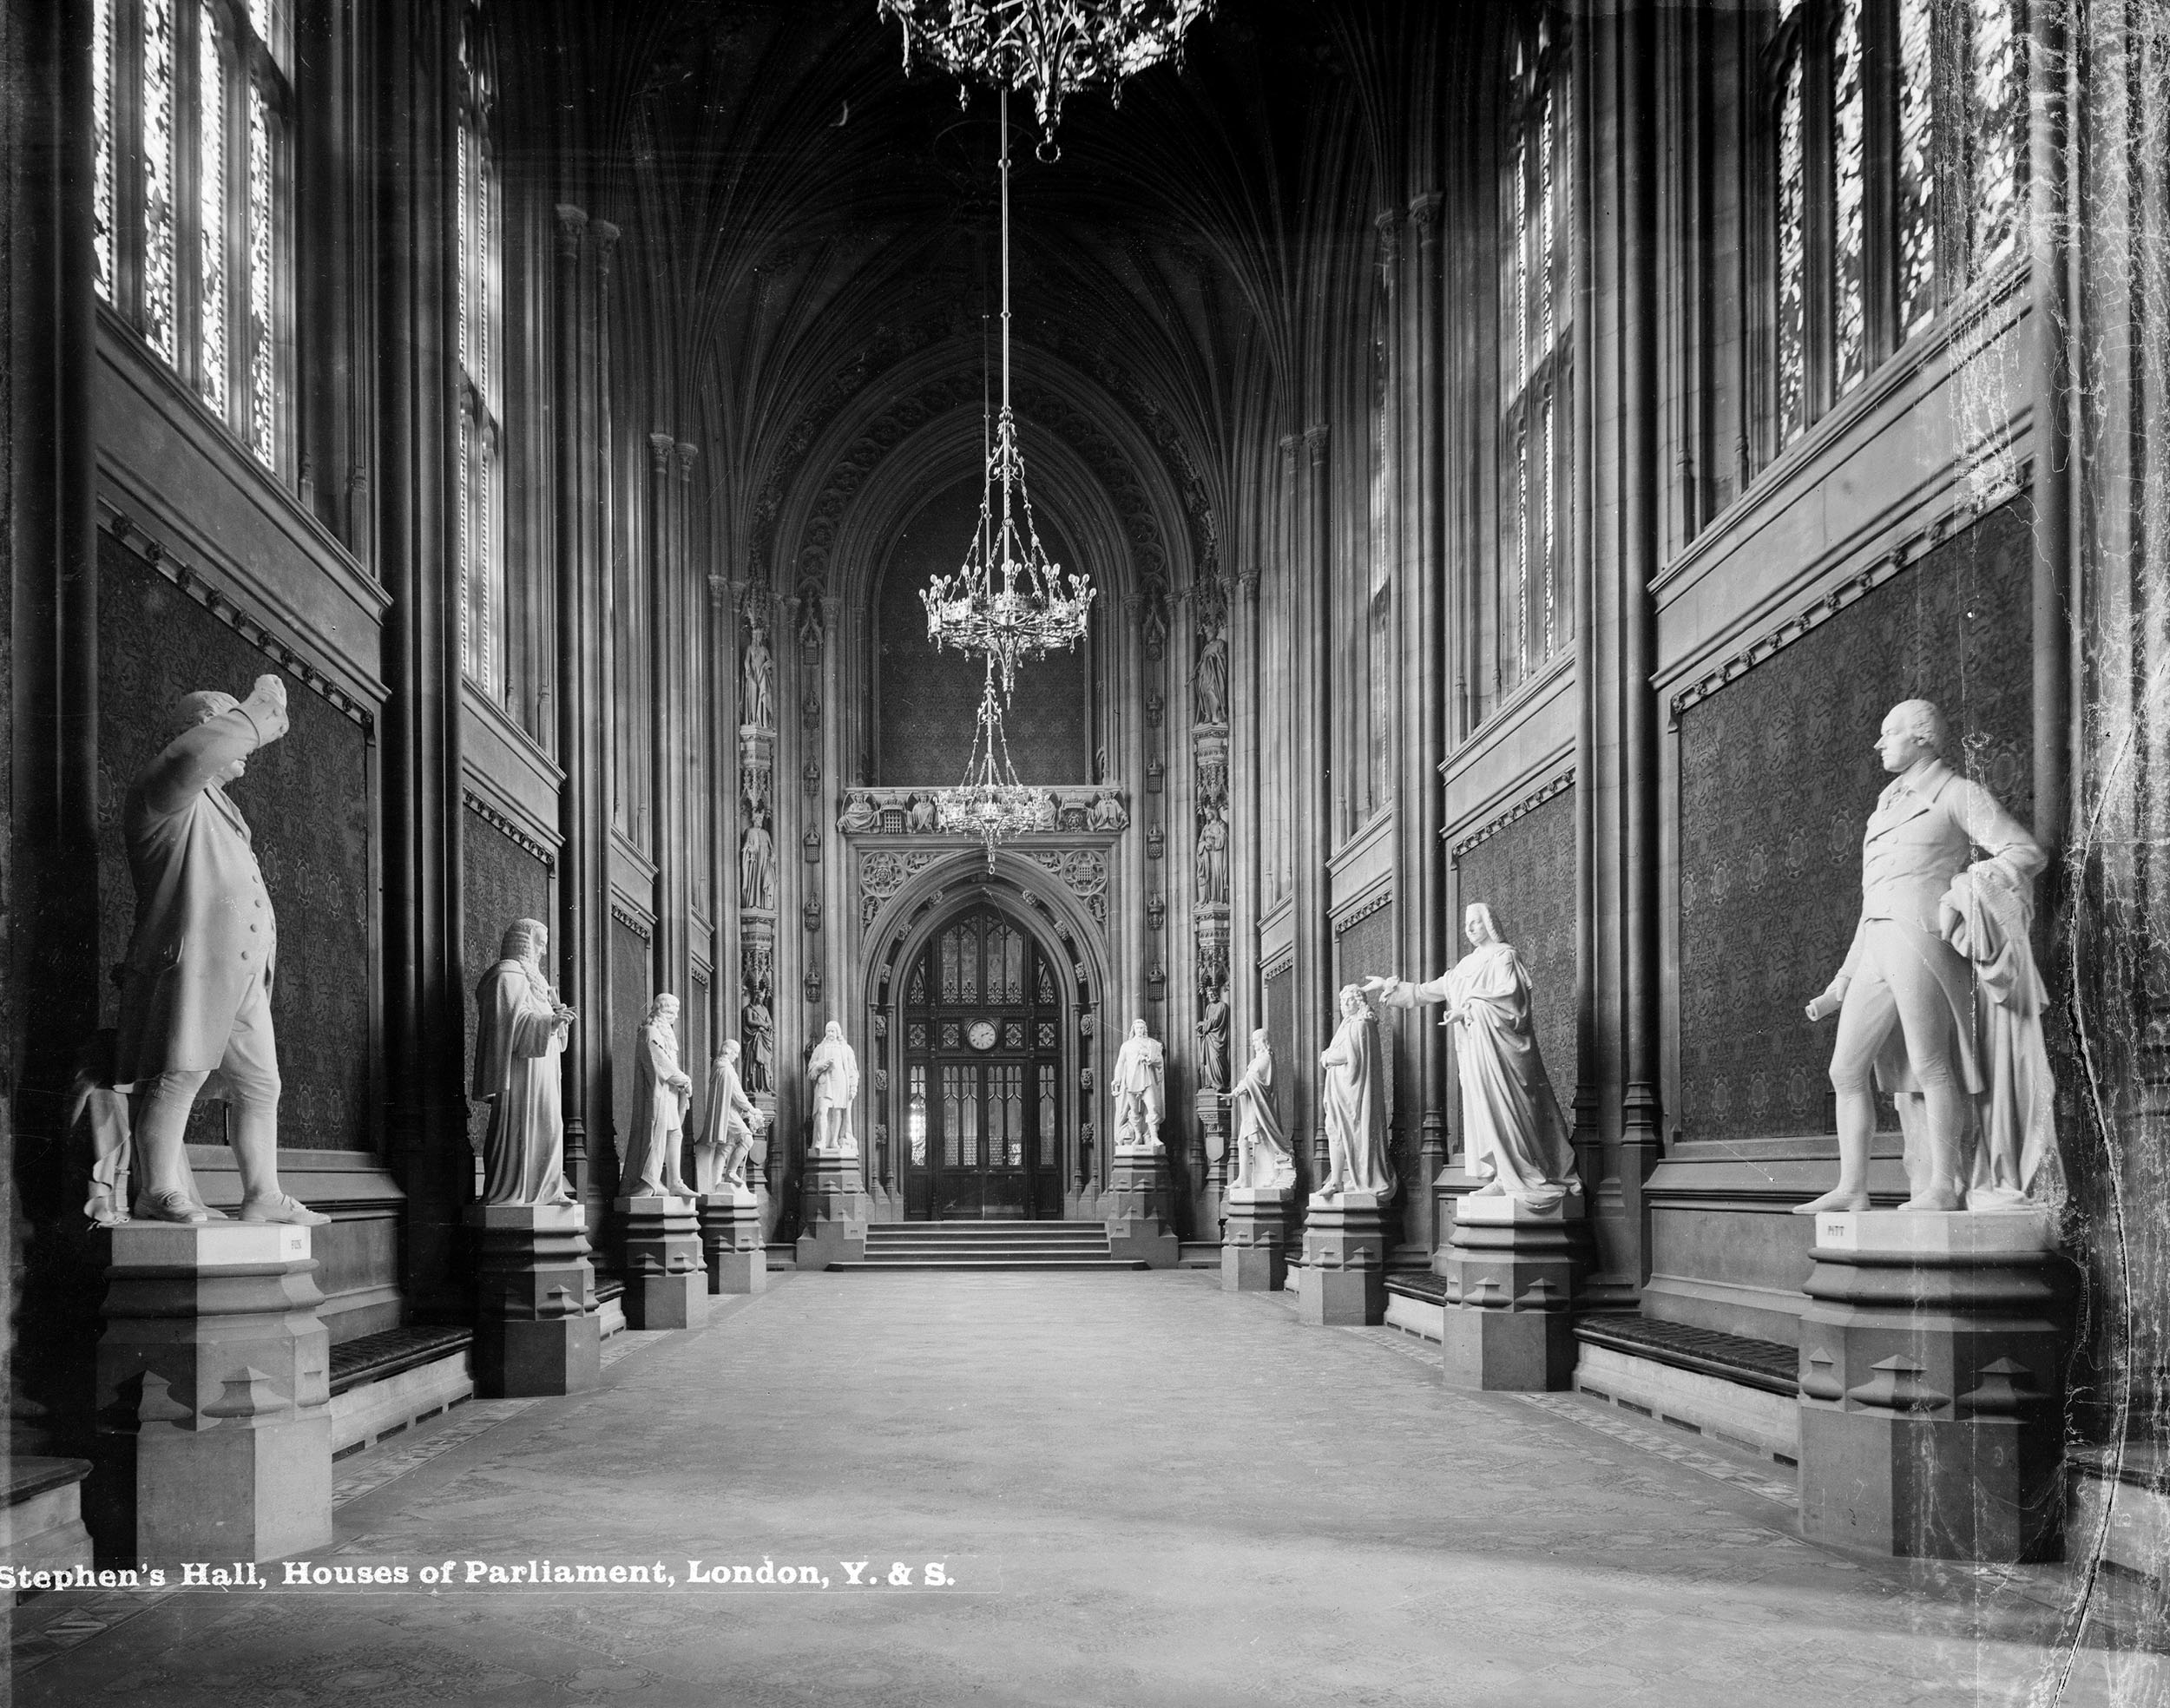 Photograph of the interior of St Stephen’s Hall in the Palace of Westminster, lined with statues of historic dignitaries